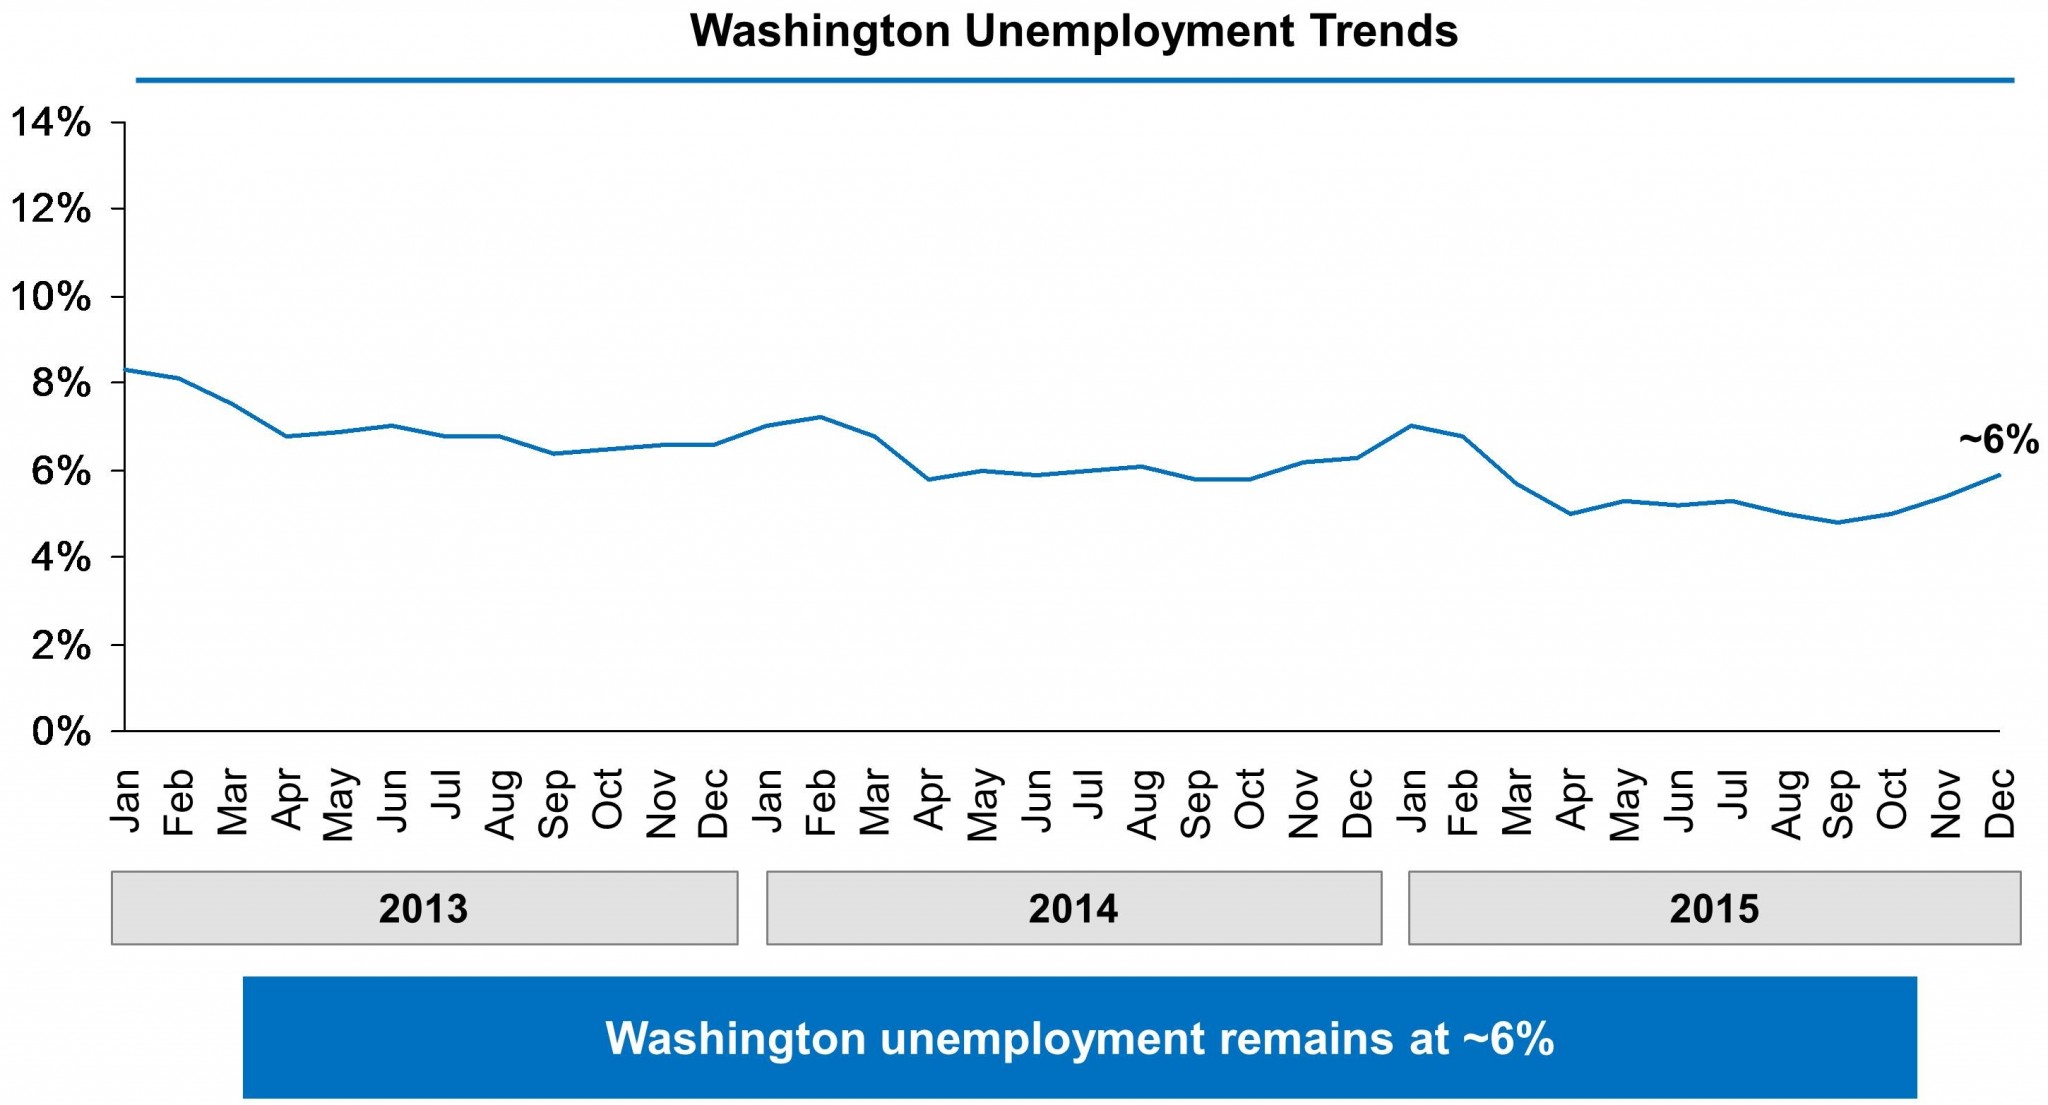 Chart showing Washington’s unemployment rate falling from just above 8% in January 2013 to 5.9% in December 2015.